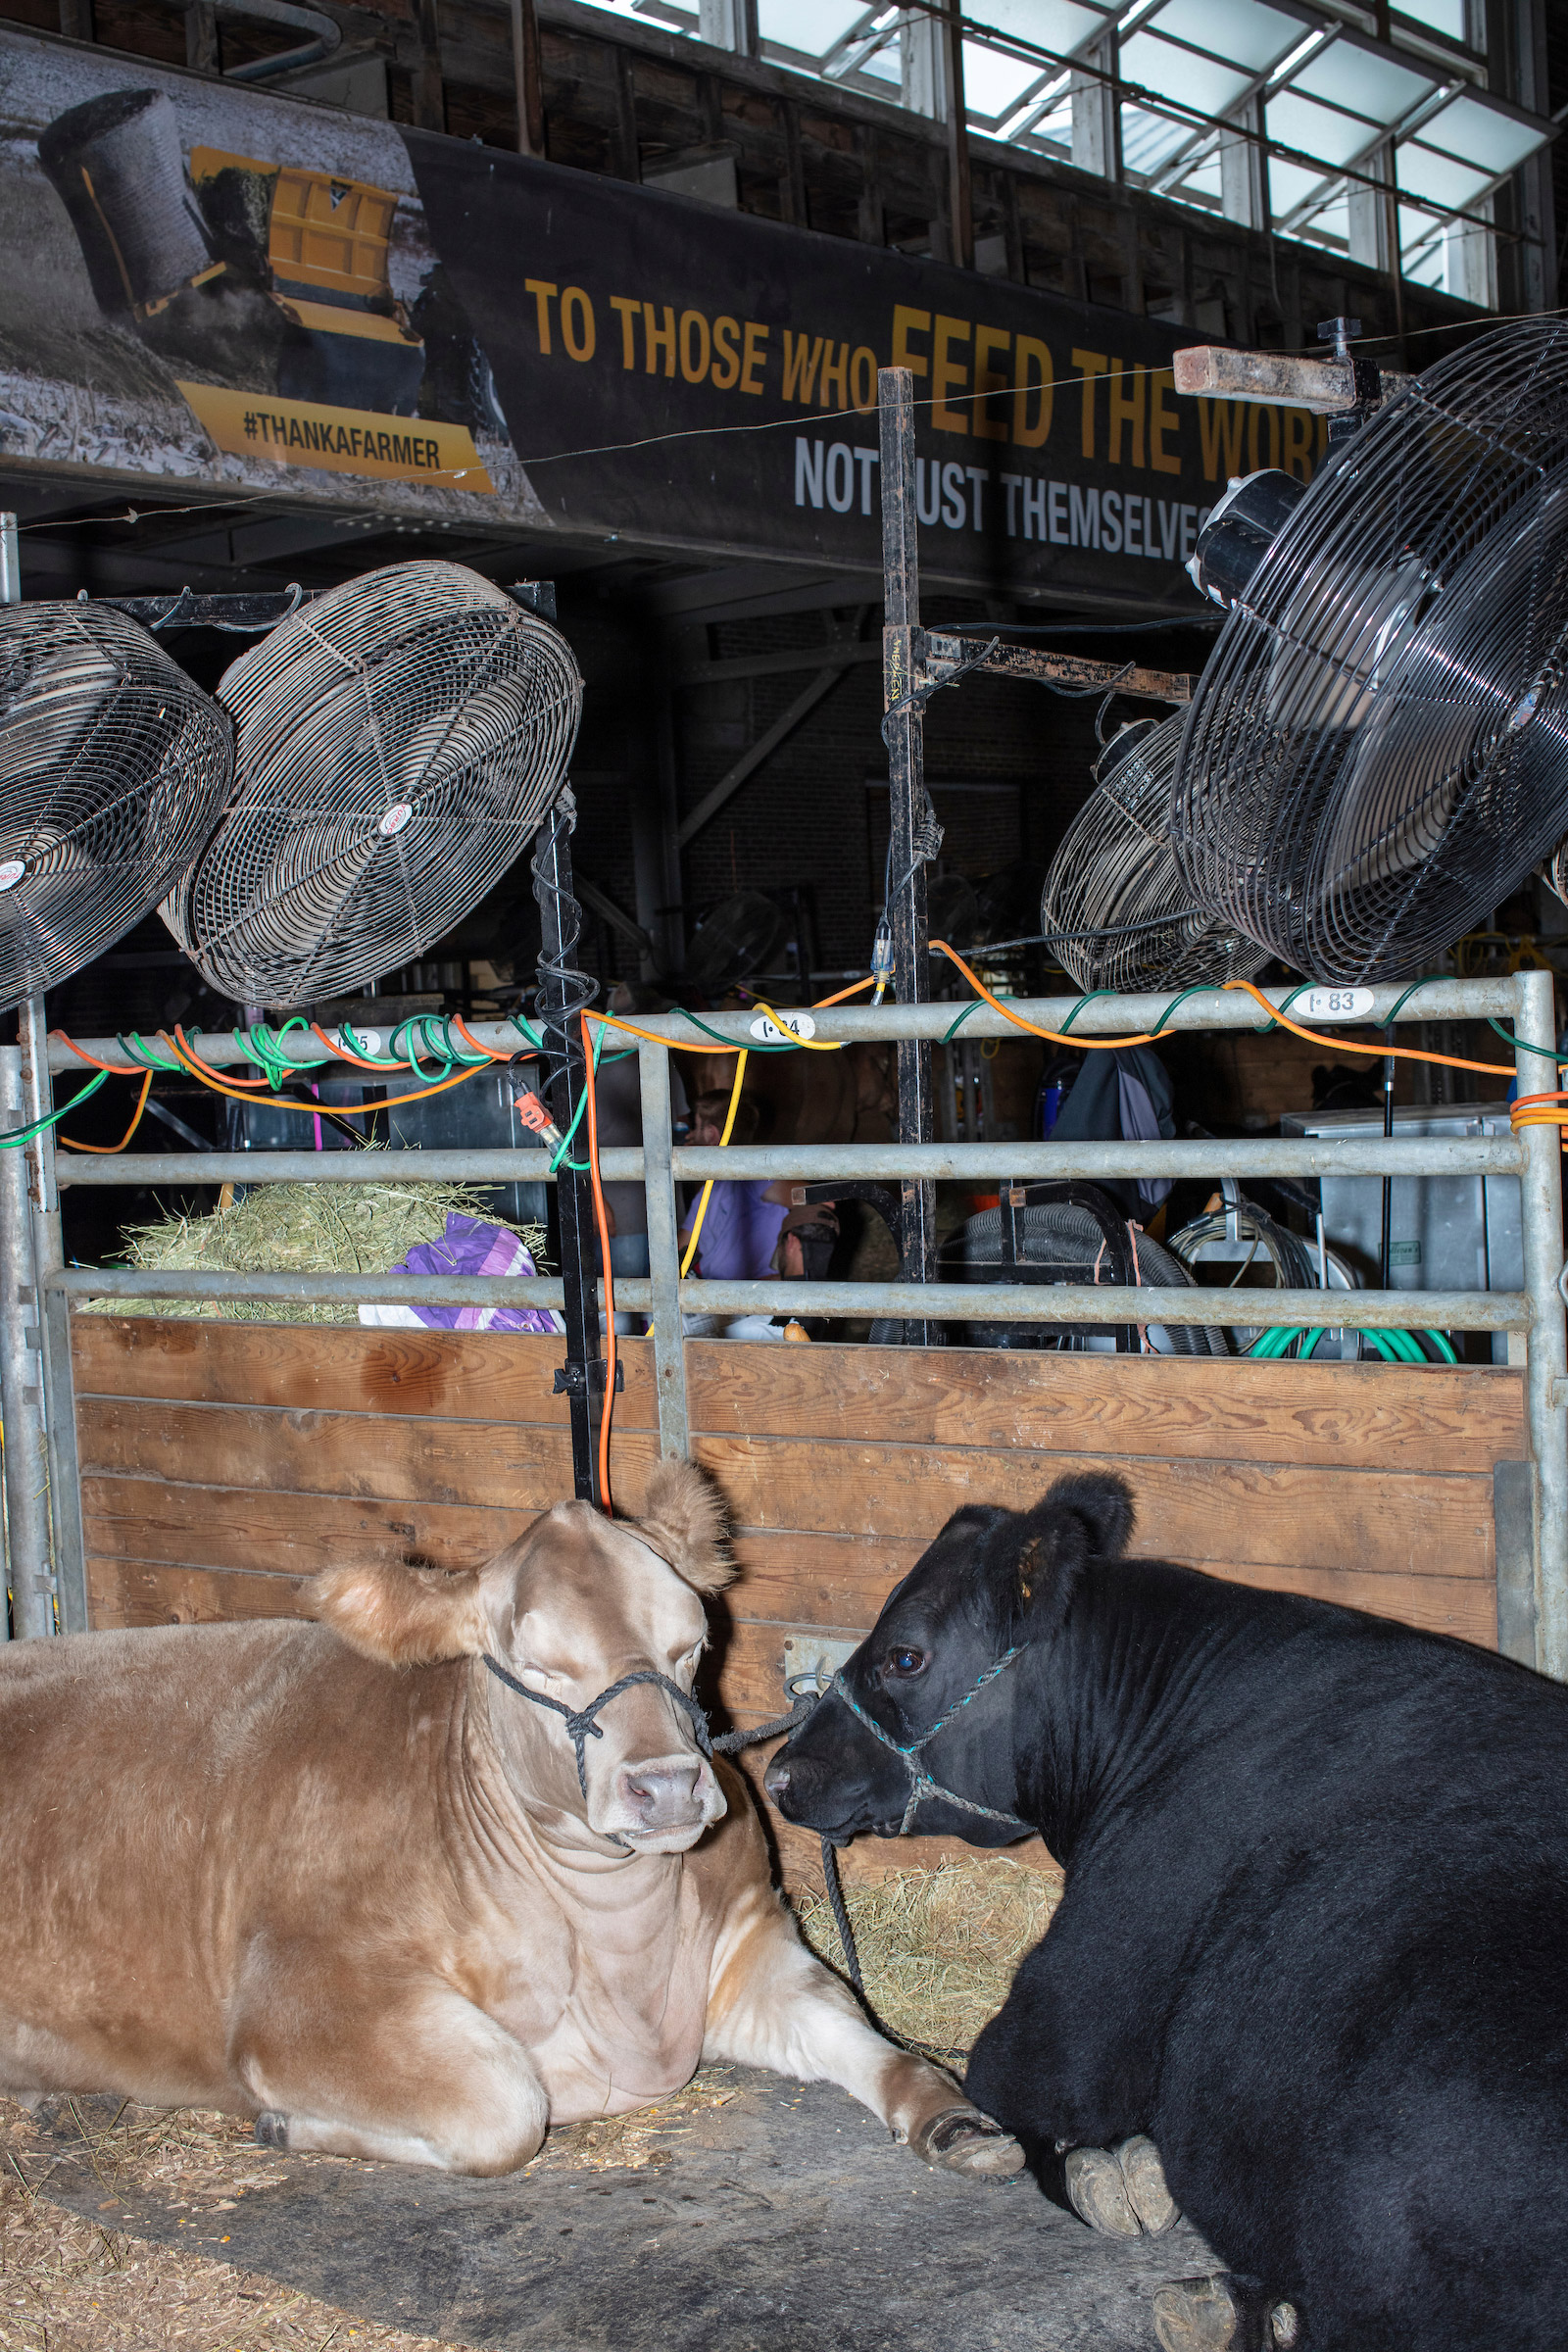 Cattle rest in the Cattle Barn at the Iowa State Fair in Des Moines, Iowa, on Mon., Aug. 12, 2019.